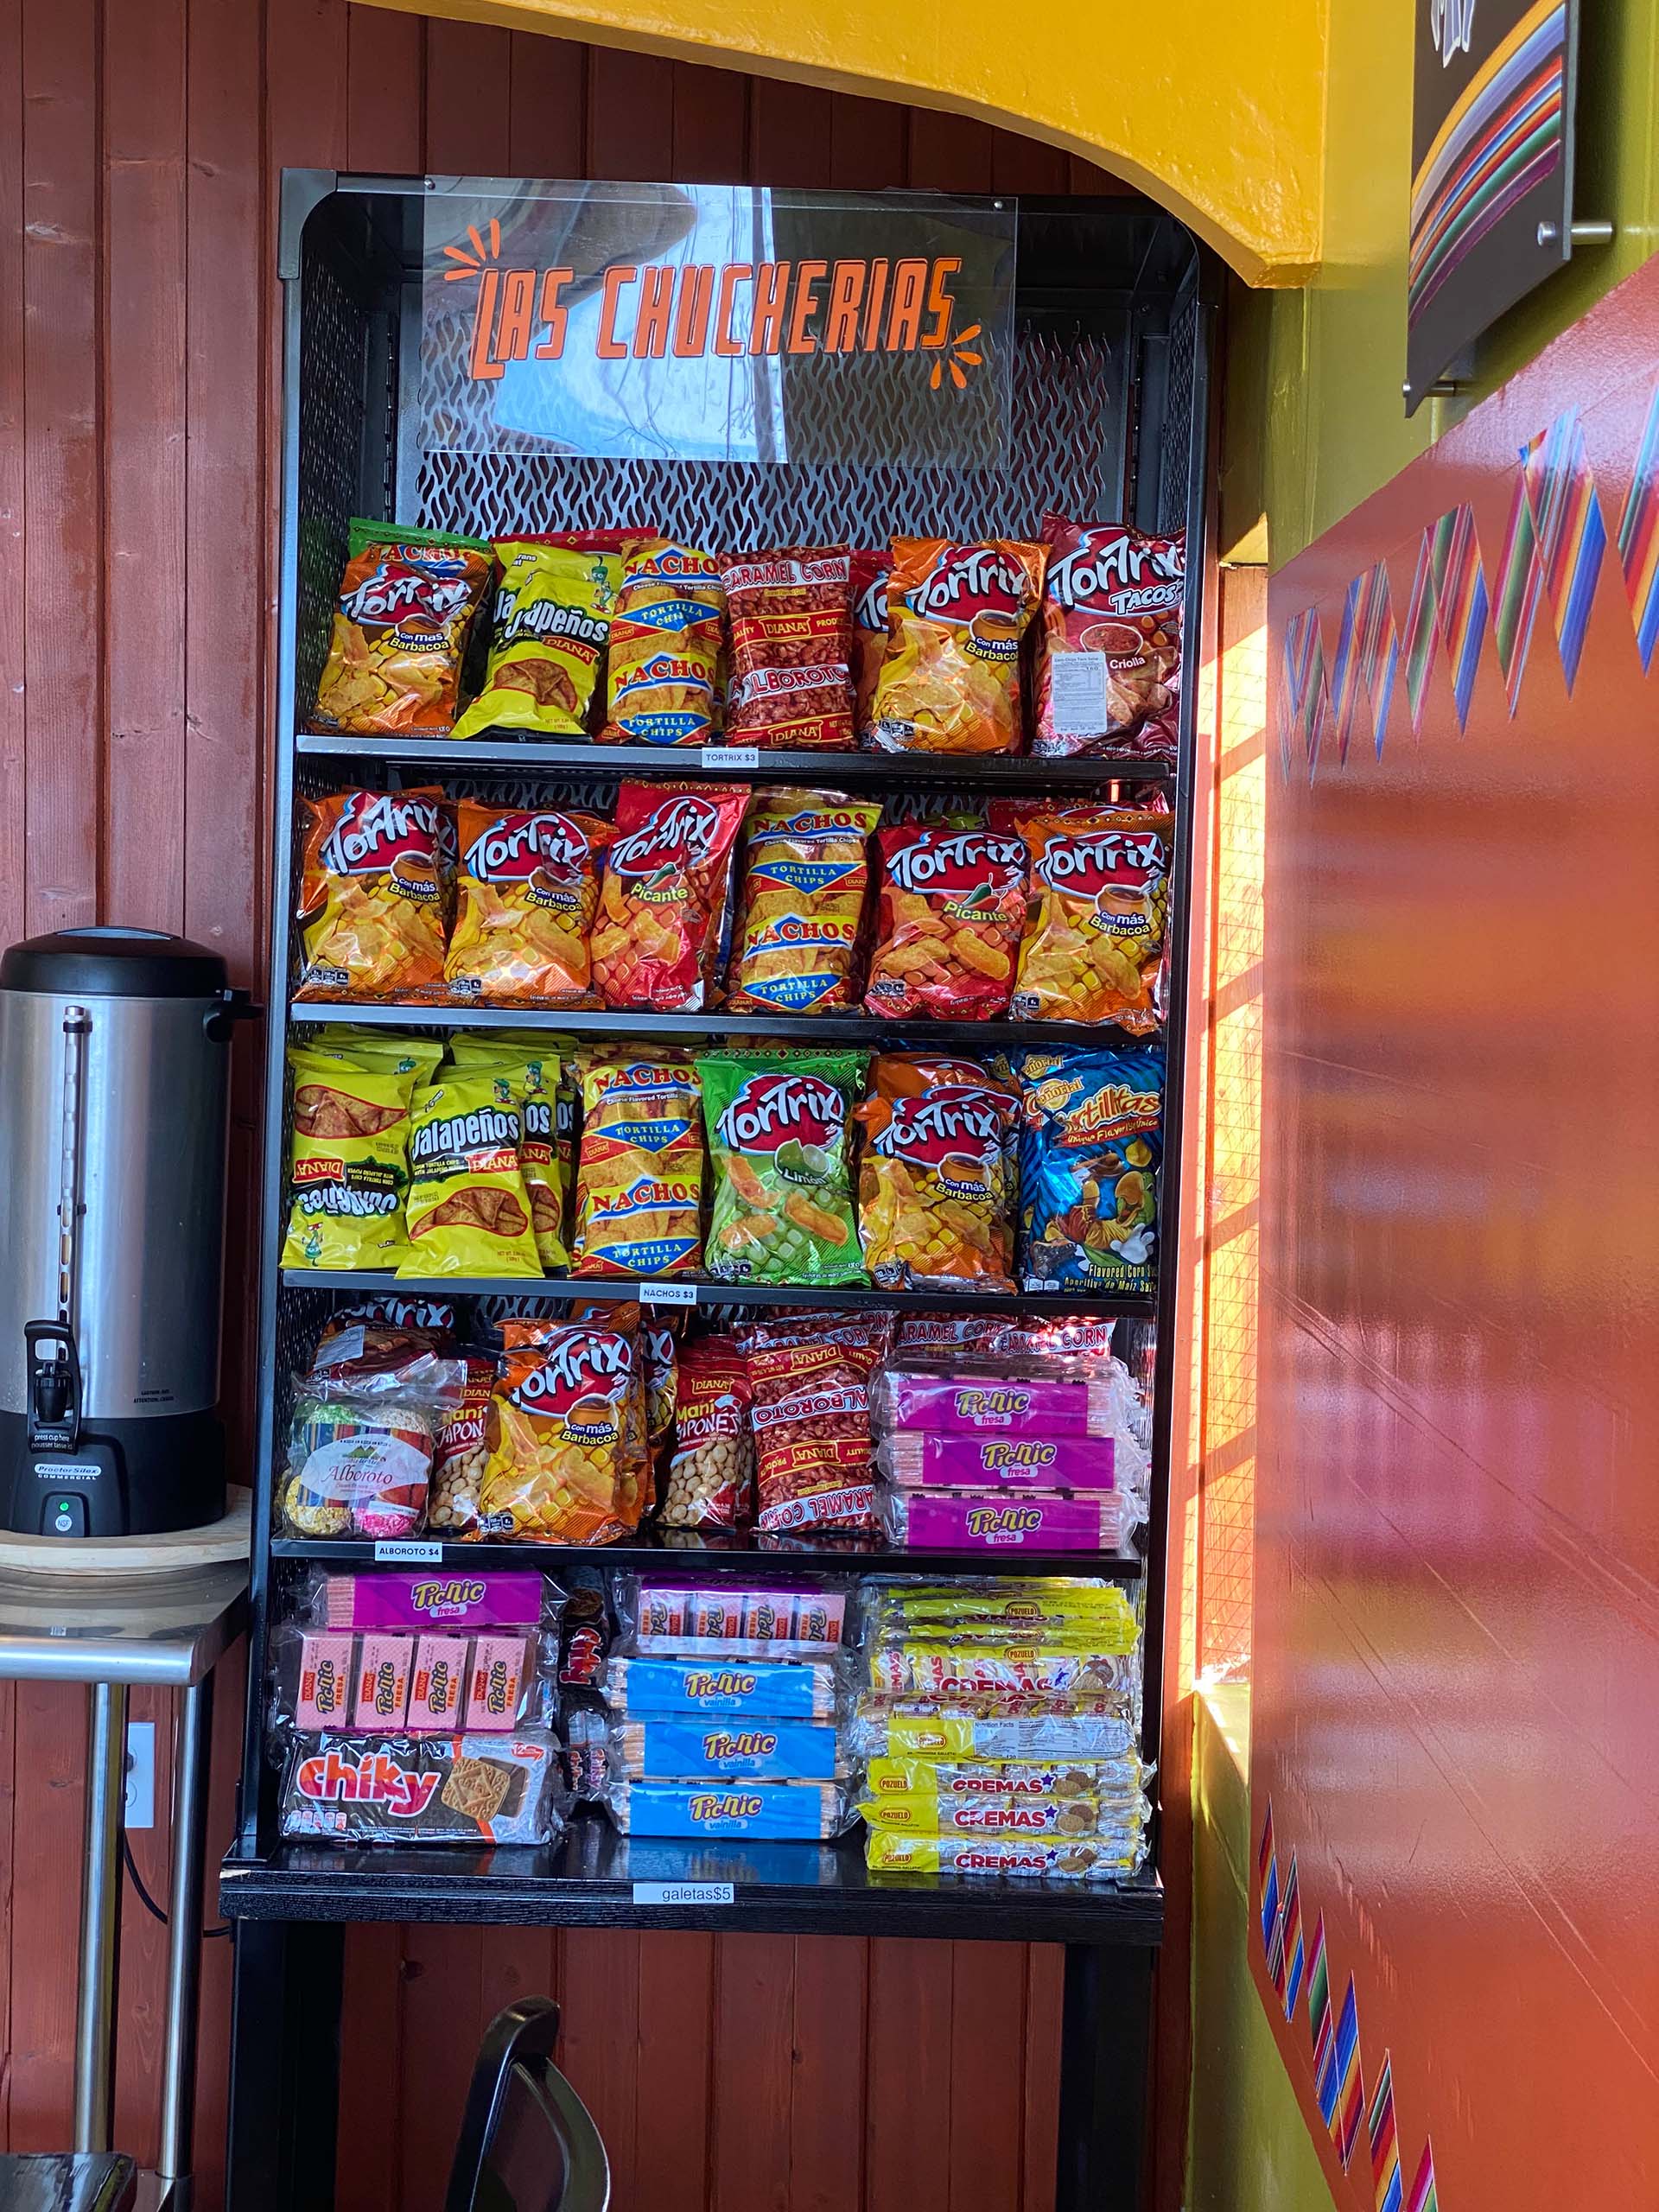 A display shelf stocked full of Central American chips and other snacks.